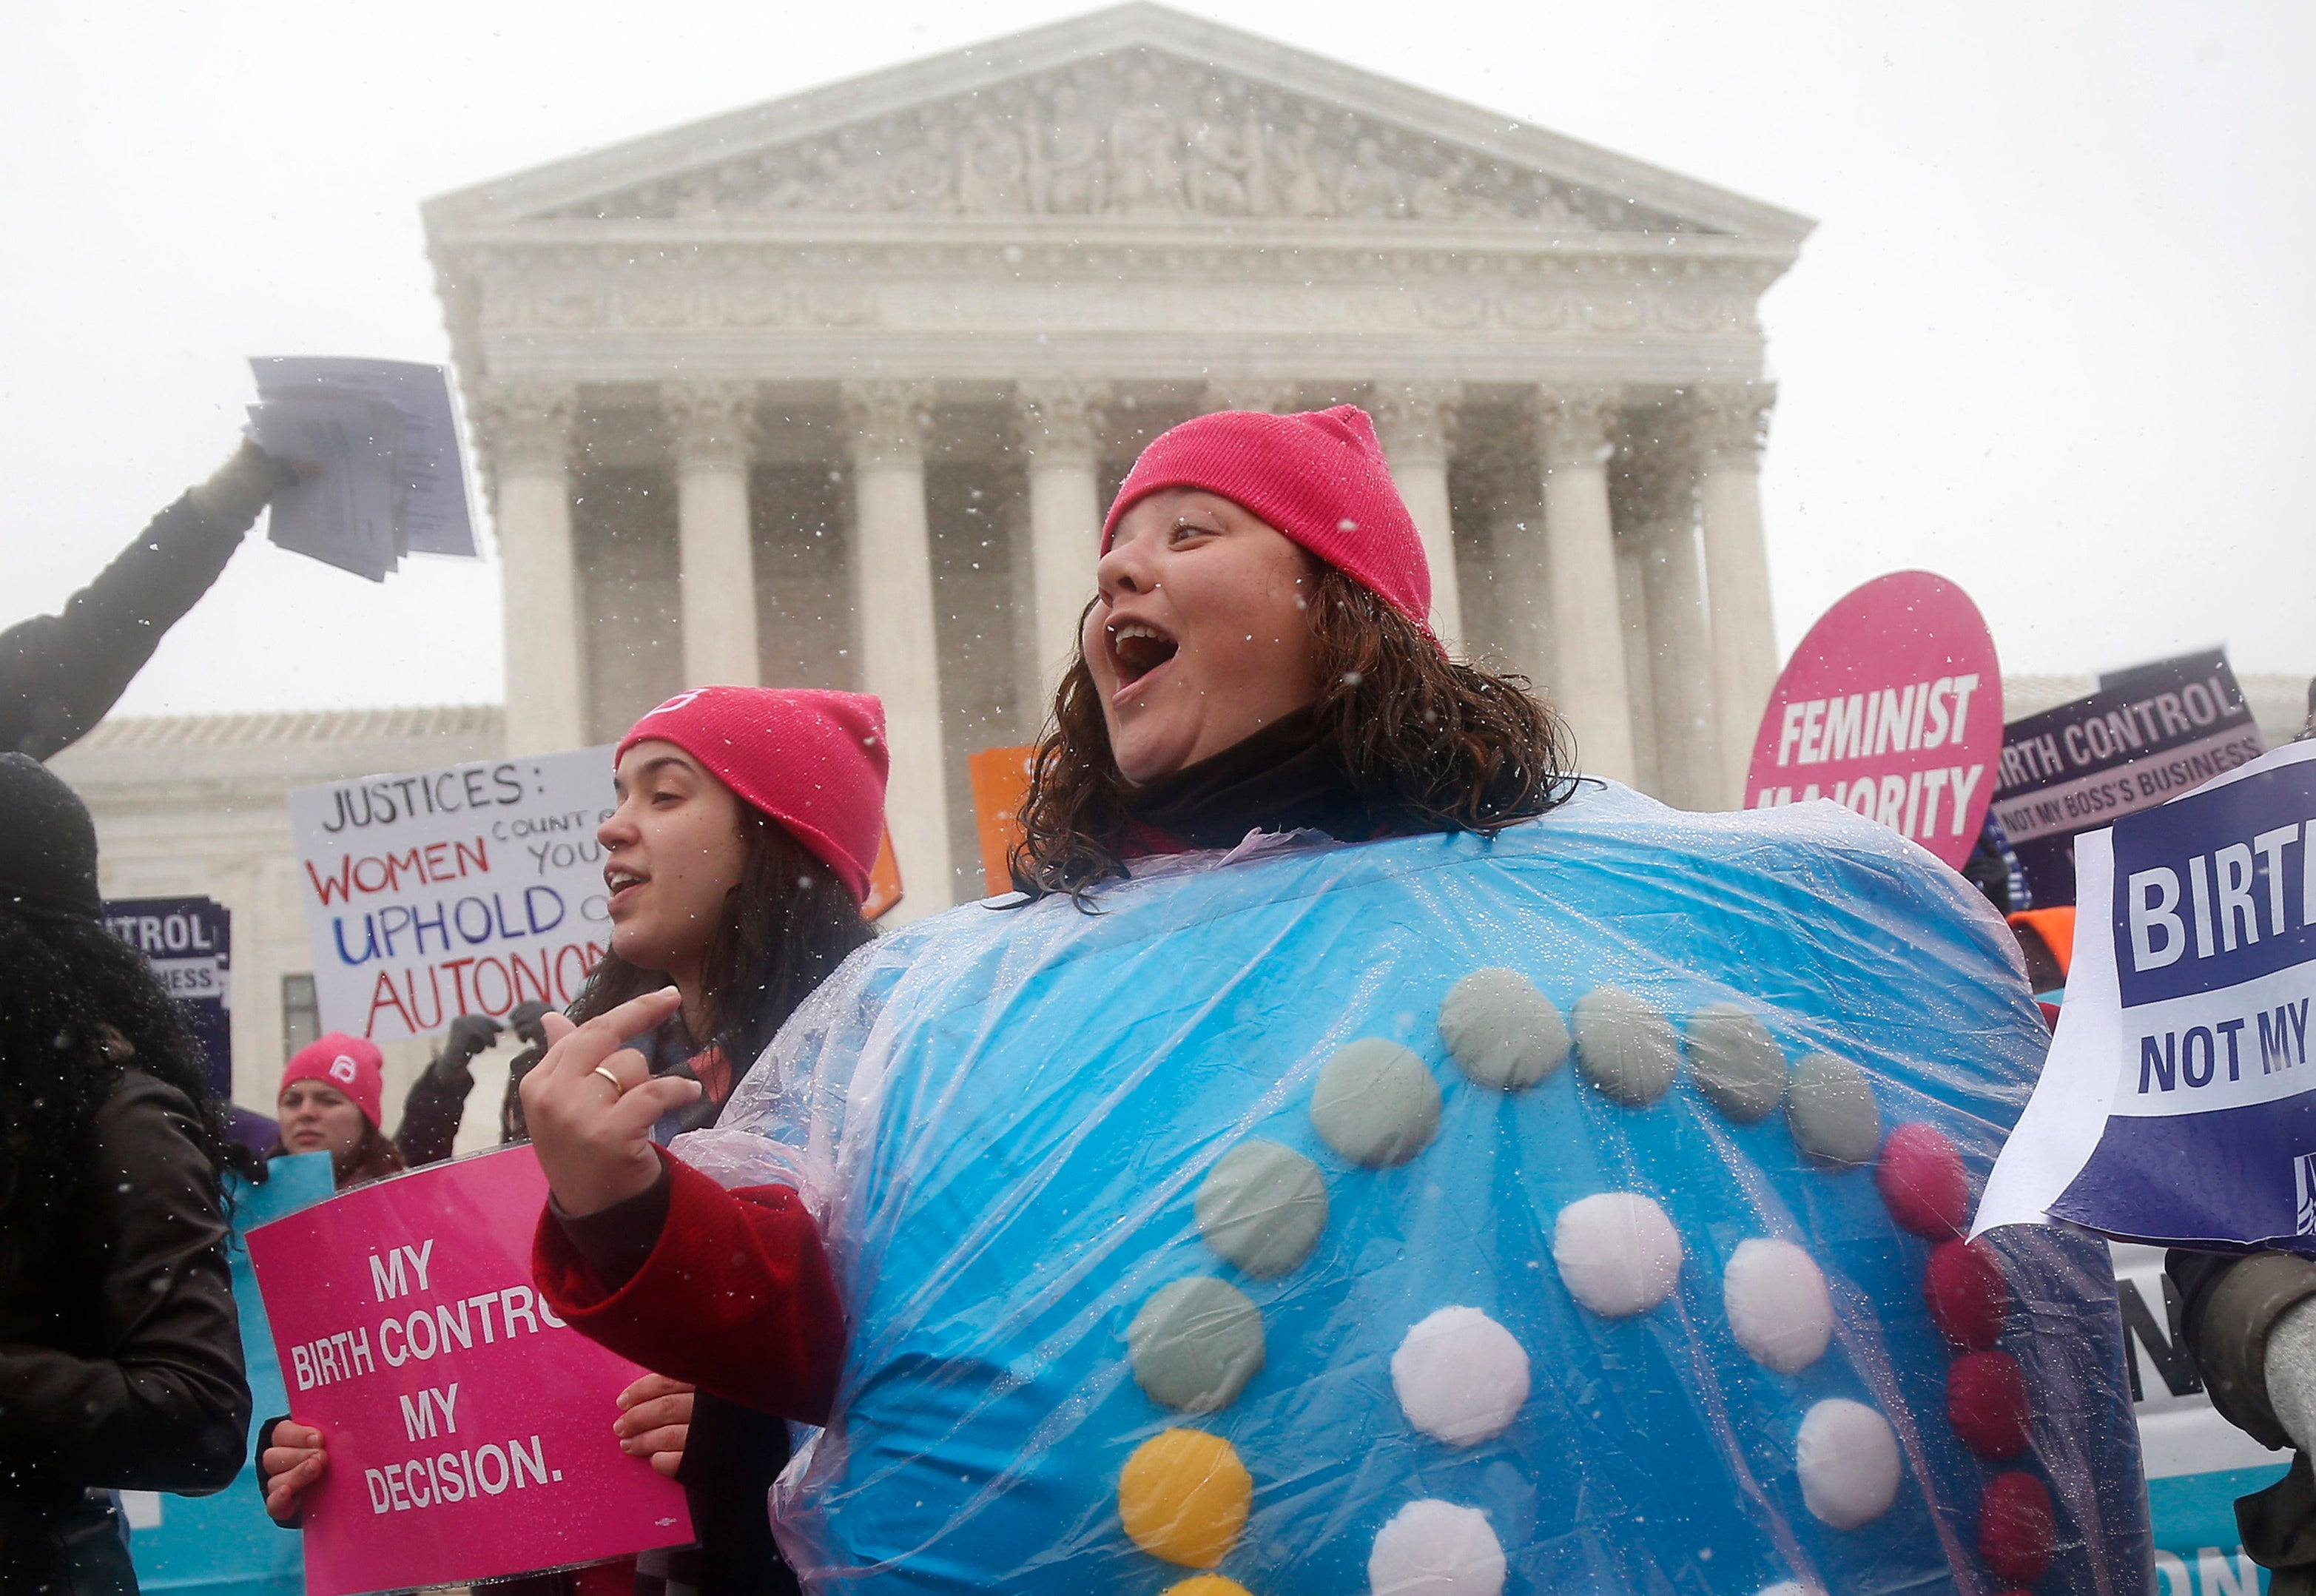 Margot Riphagen of New Orleans, wears a birth control pill costume as she protests in front of the Supreme Court in Washington